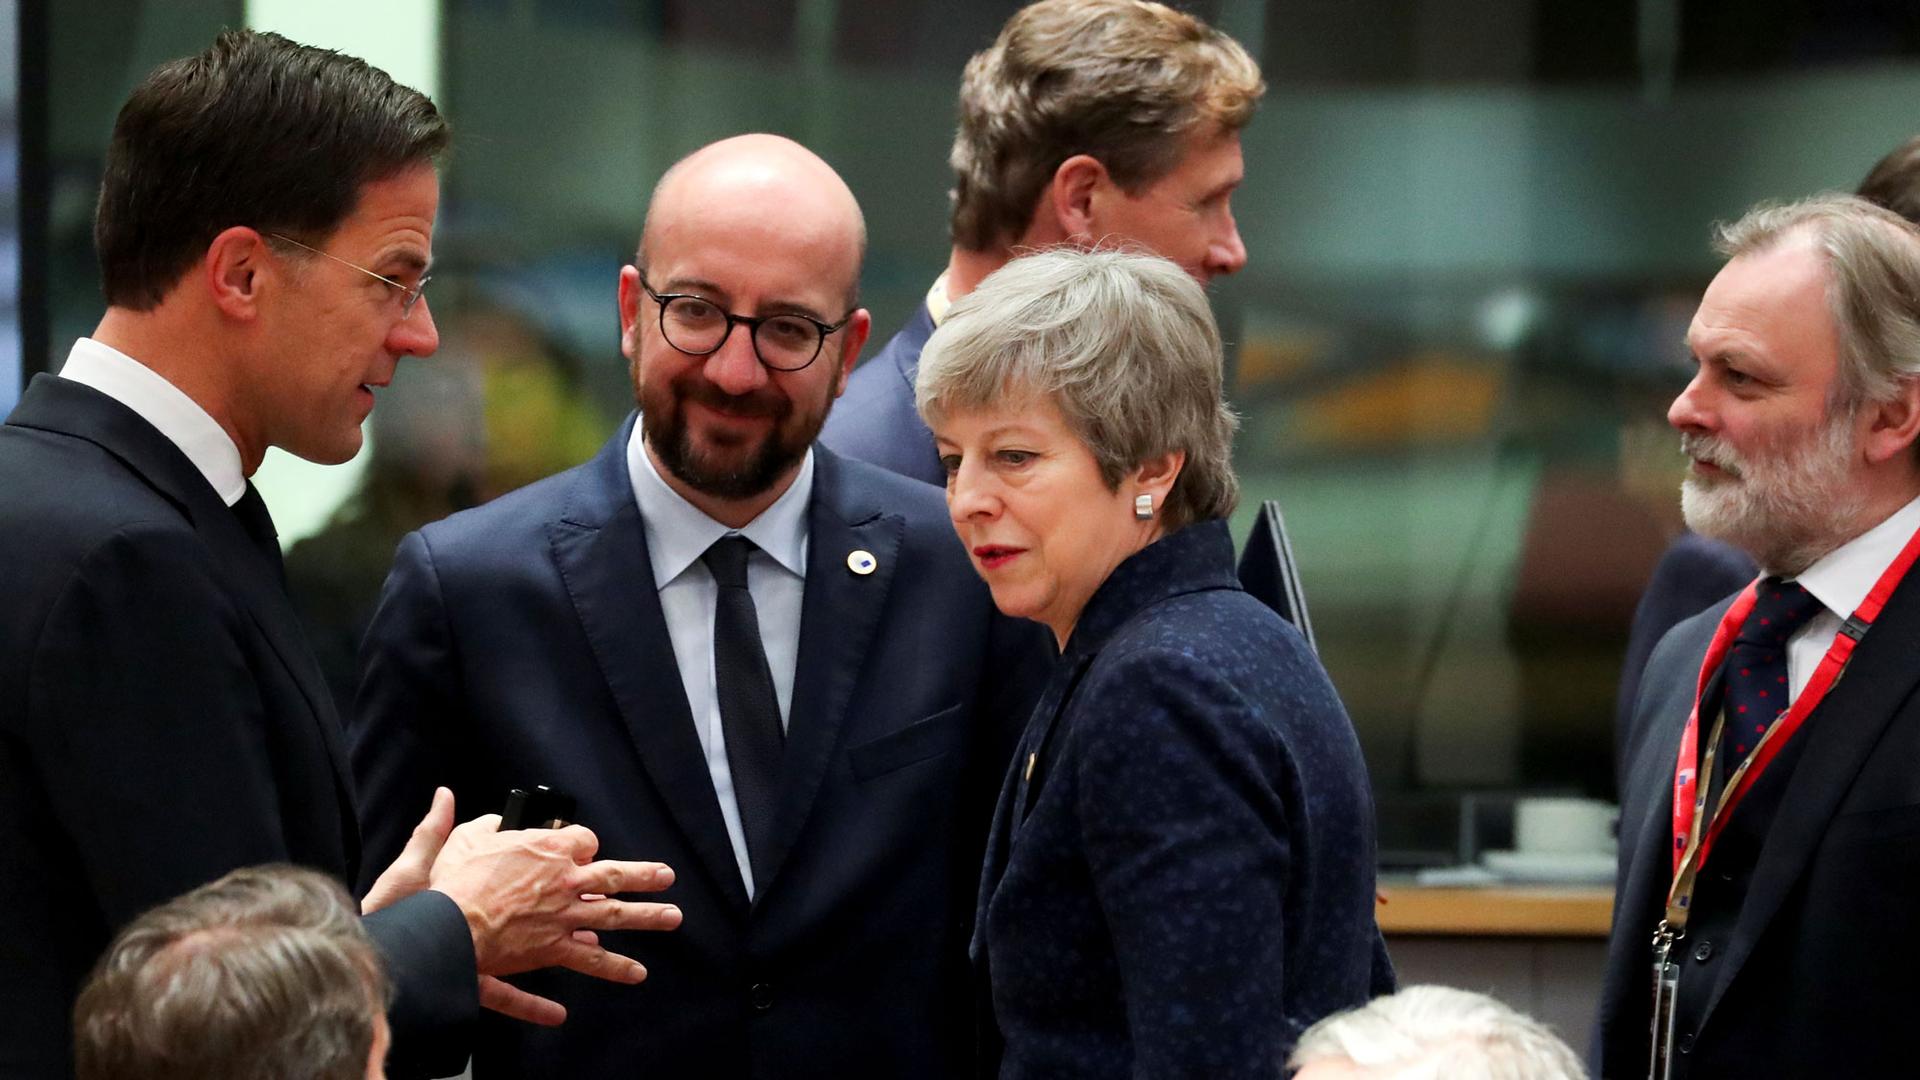 Britain's Prime Minister Theresa May is shown in the middle of a group of three men, all wearing dark suits.